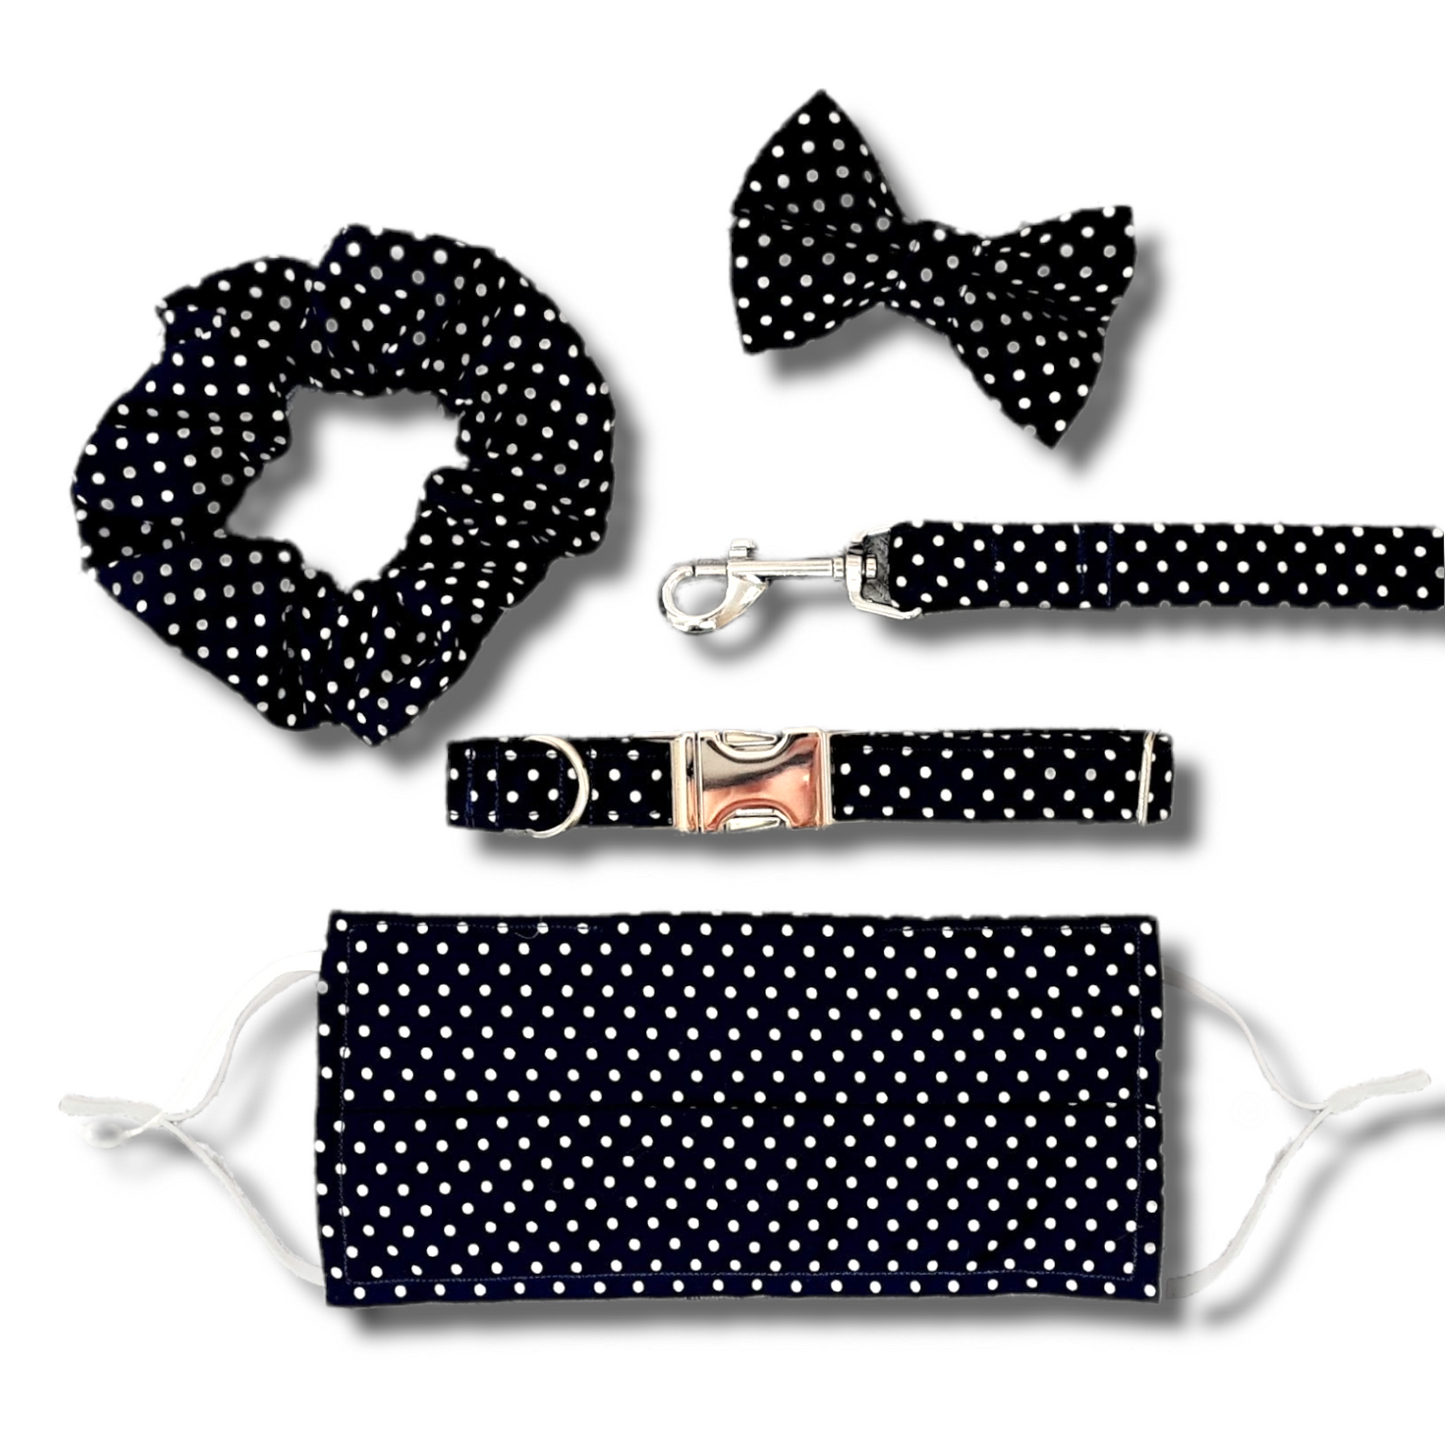 Polka dot print face mask. Washable and reusable with filter pocket. Adjustable elastic ear loops with toggle adjustment.